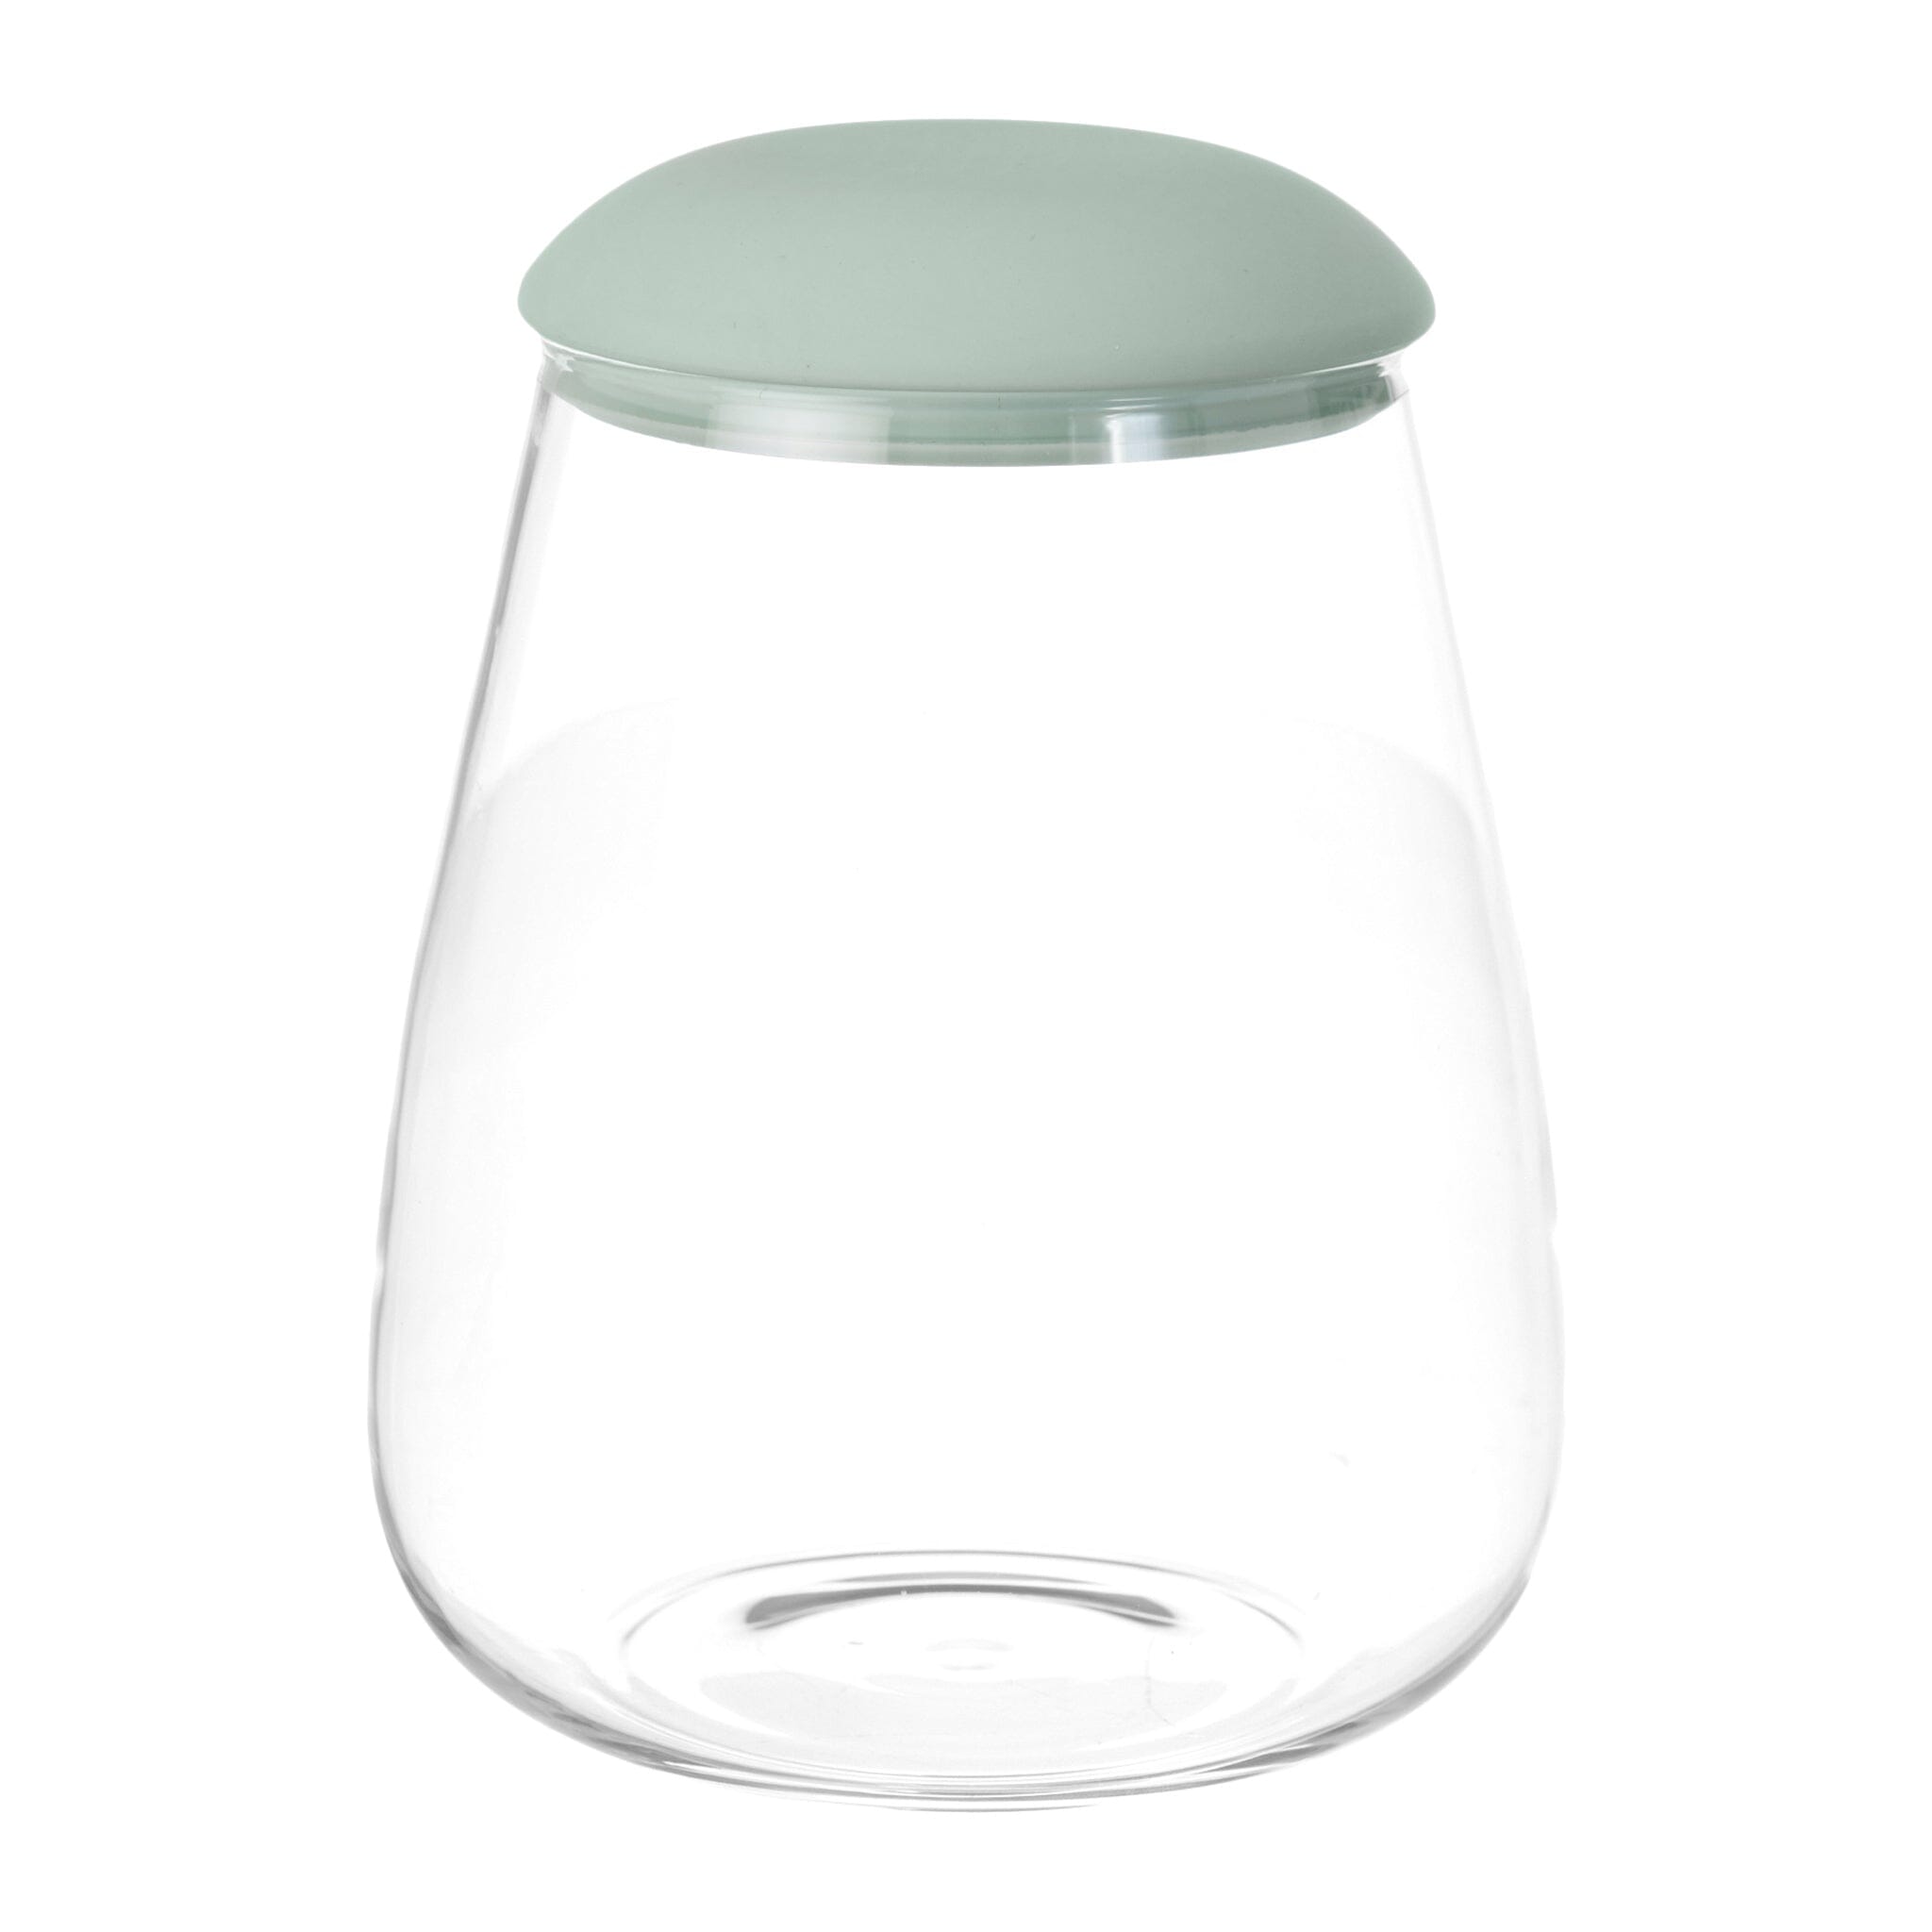 O'lala - Glass Jar with Silicone Cover - Green - 8x14cm - 520008159